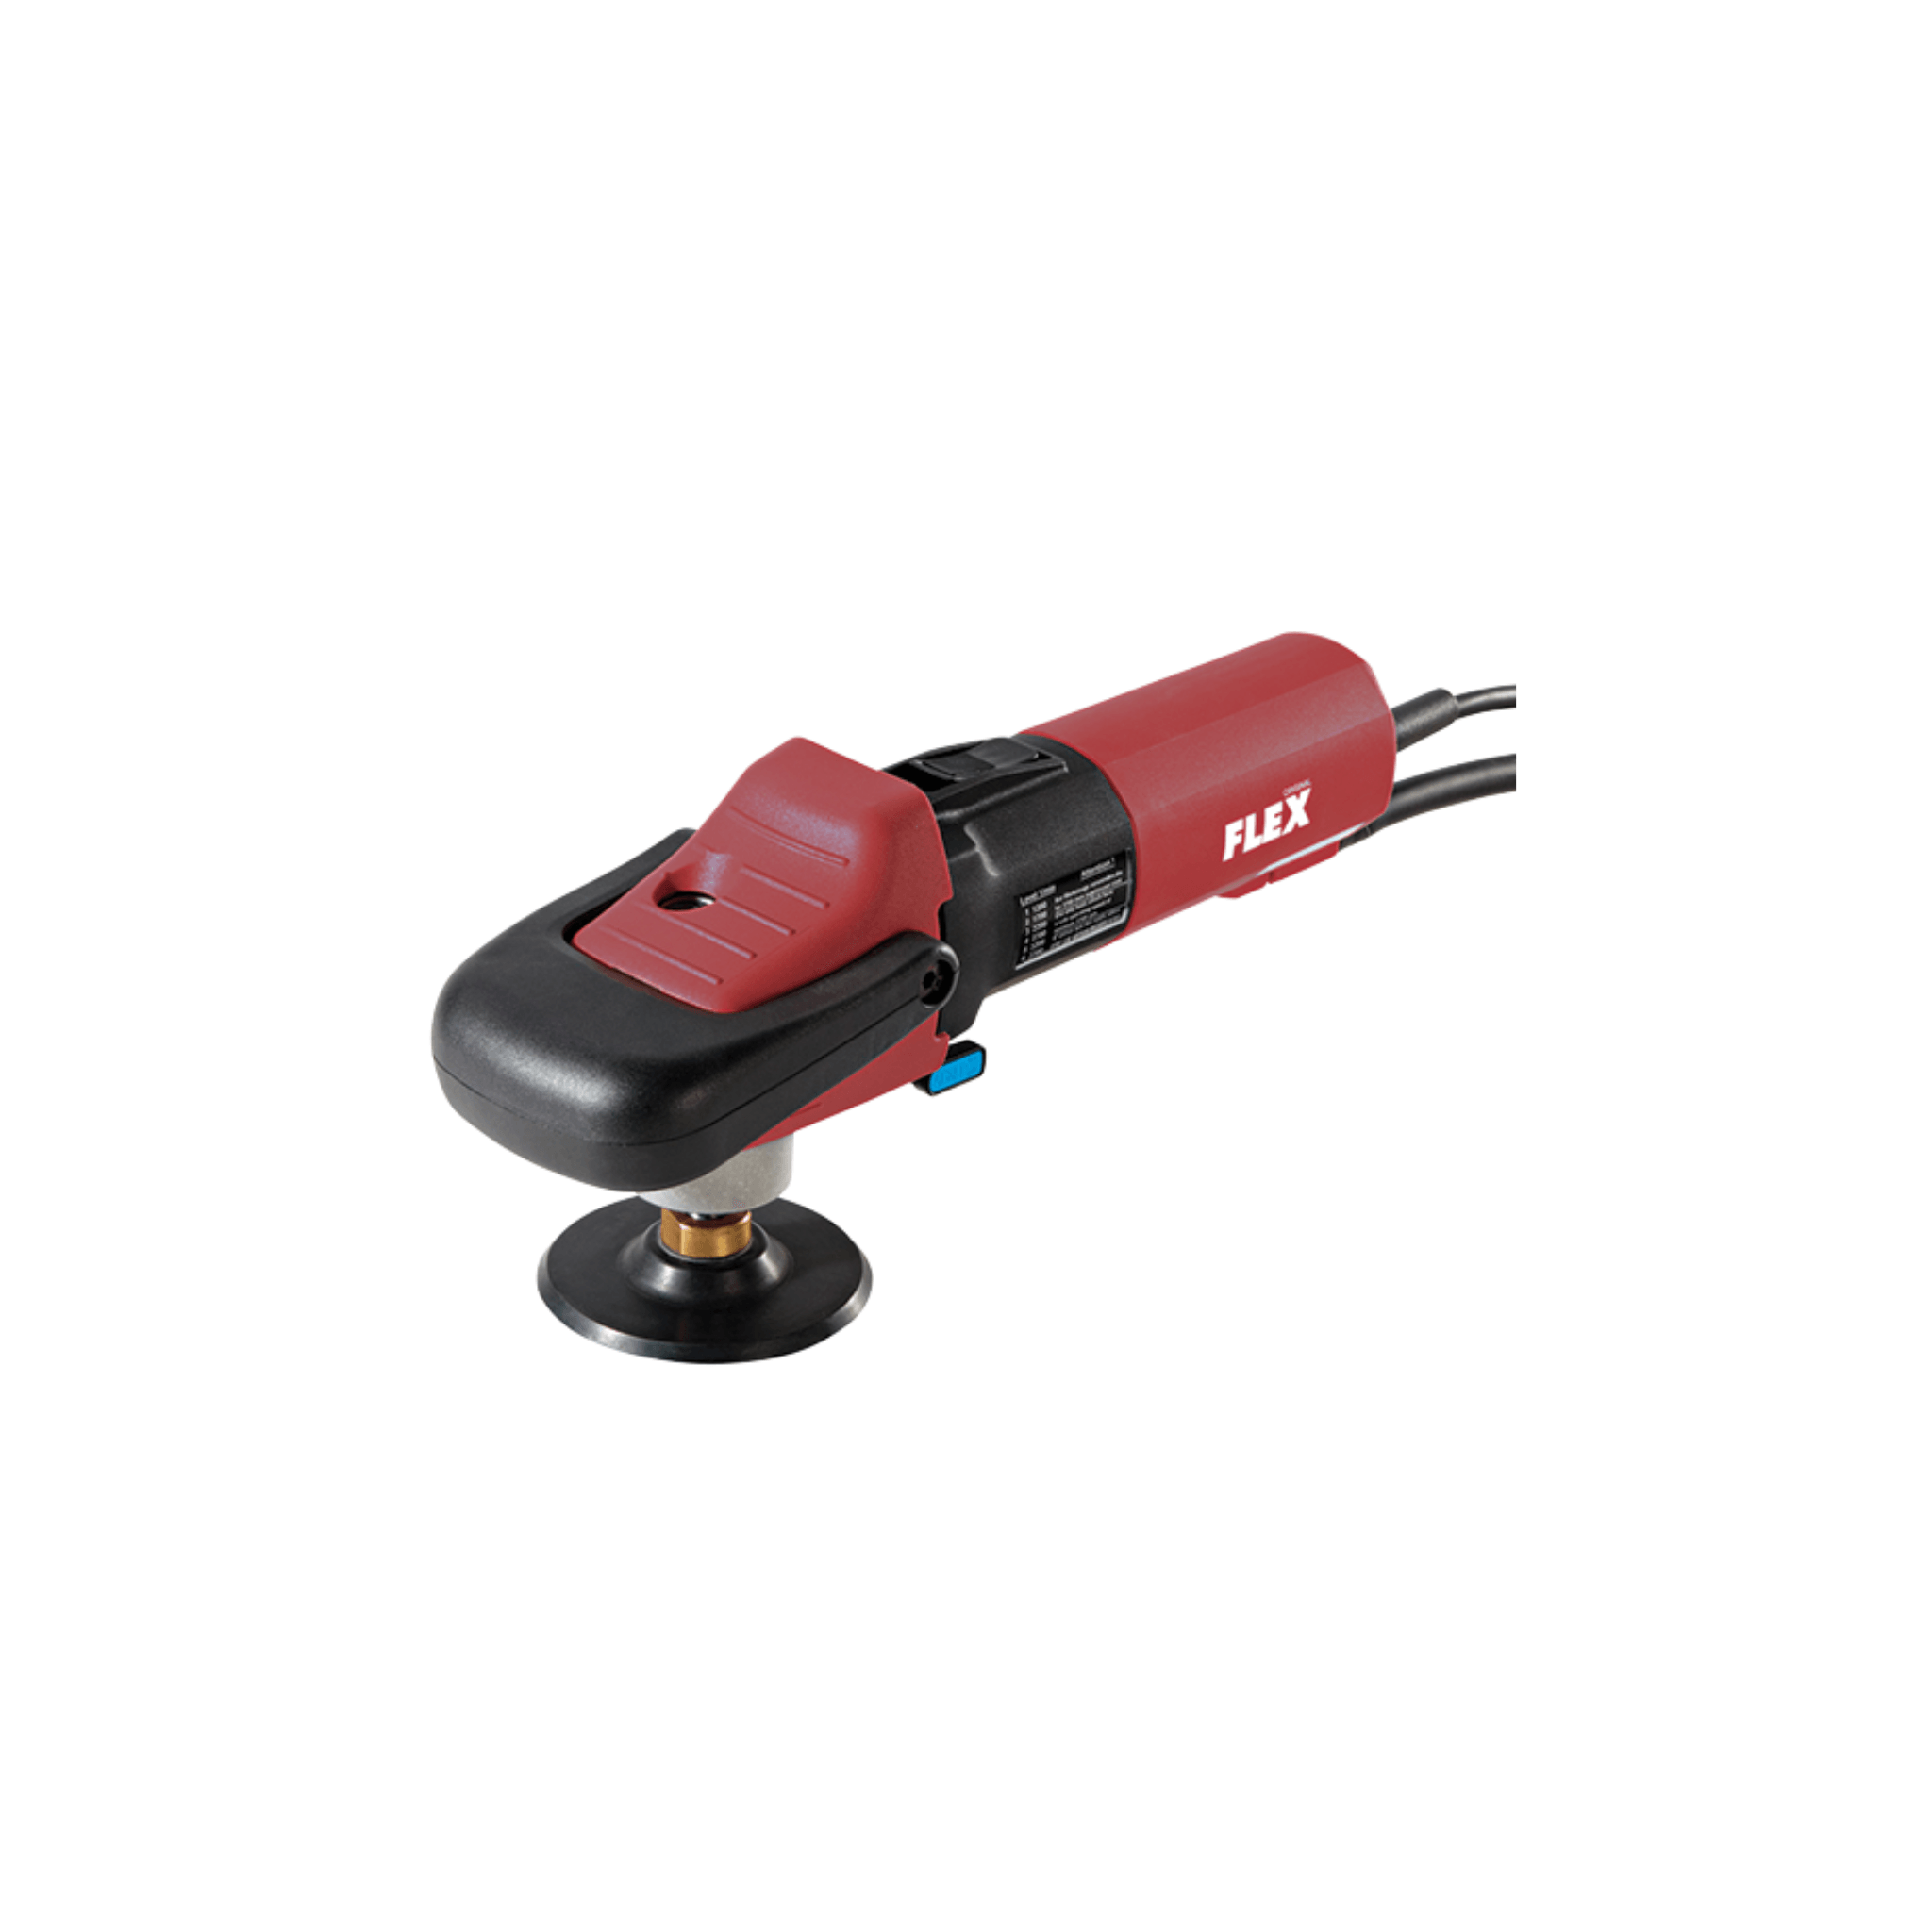 FLEX 5 Inch Compact Single Speed Wet Polisher W/ Variable Speed - Direct Stone Tool Supply, Inc